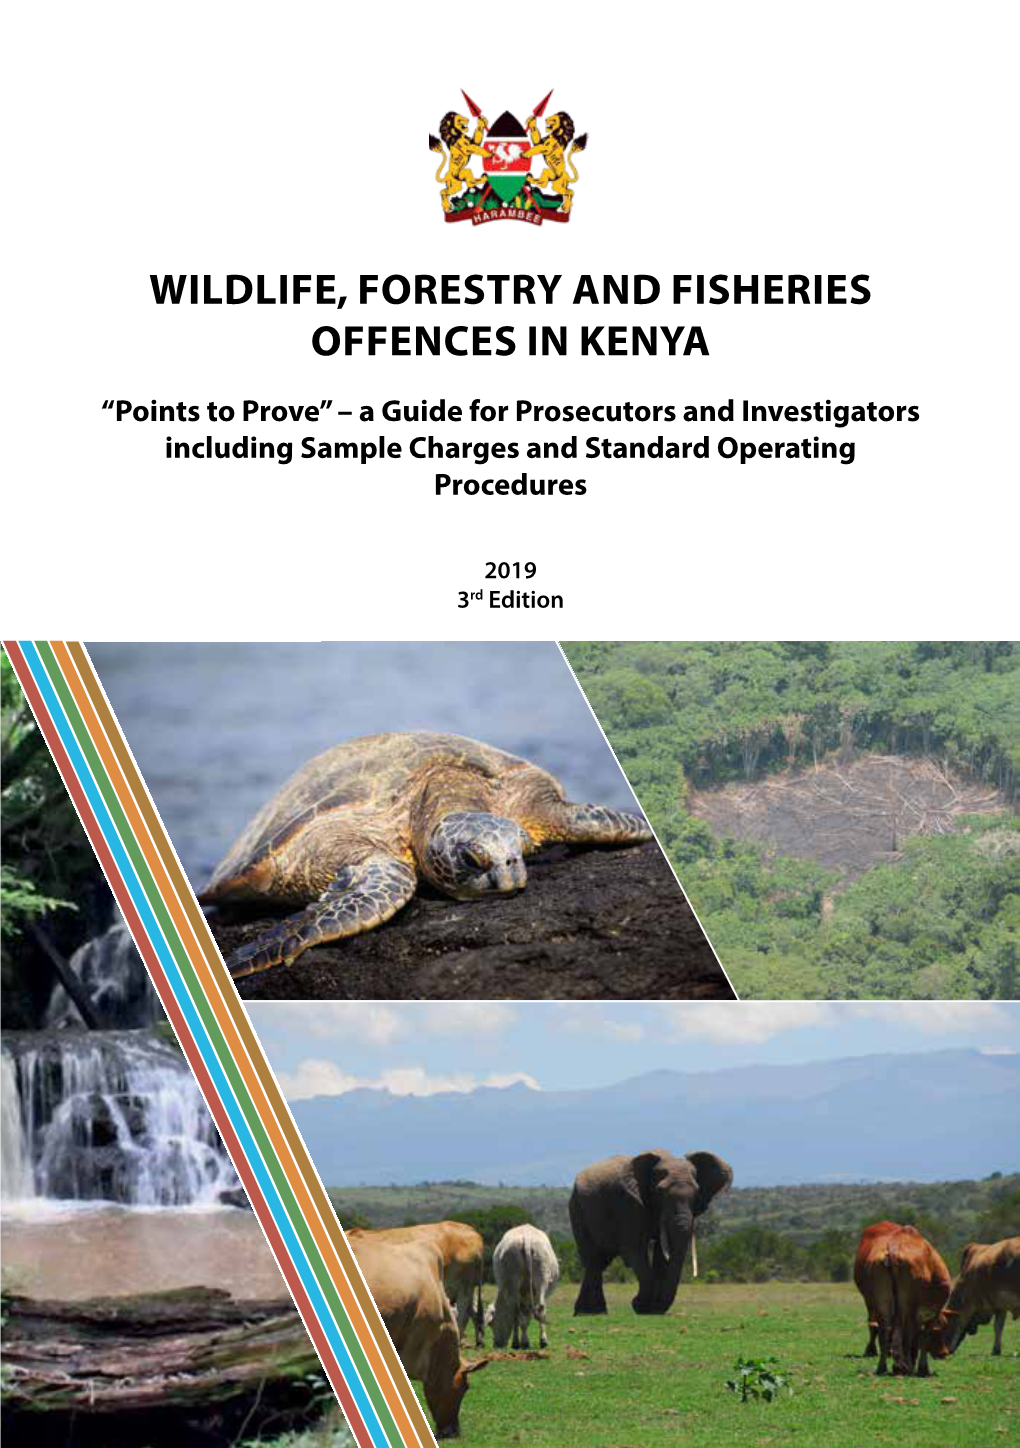 Wildlife, Forestry and Fisheries Offences in Kenya